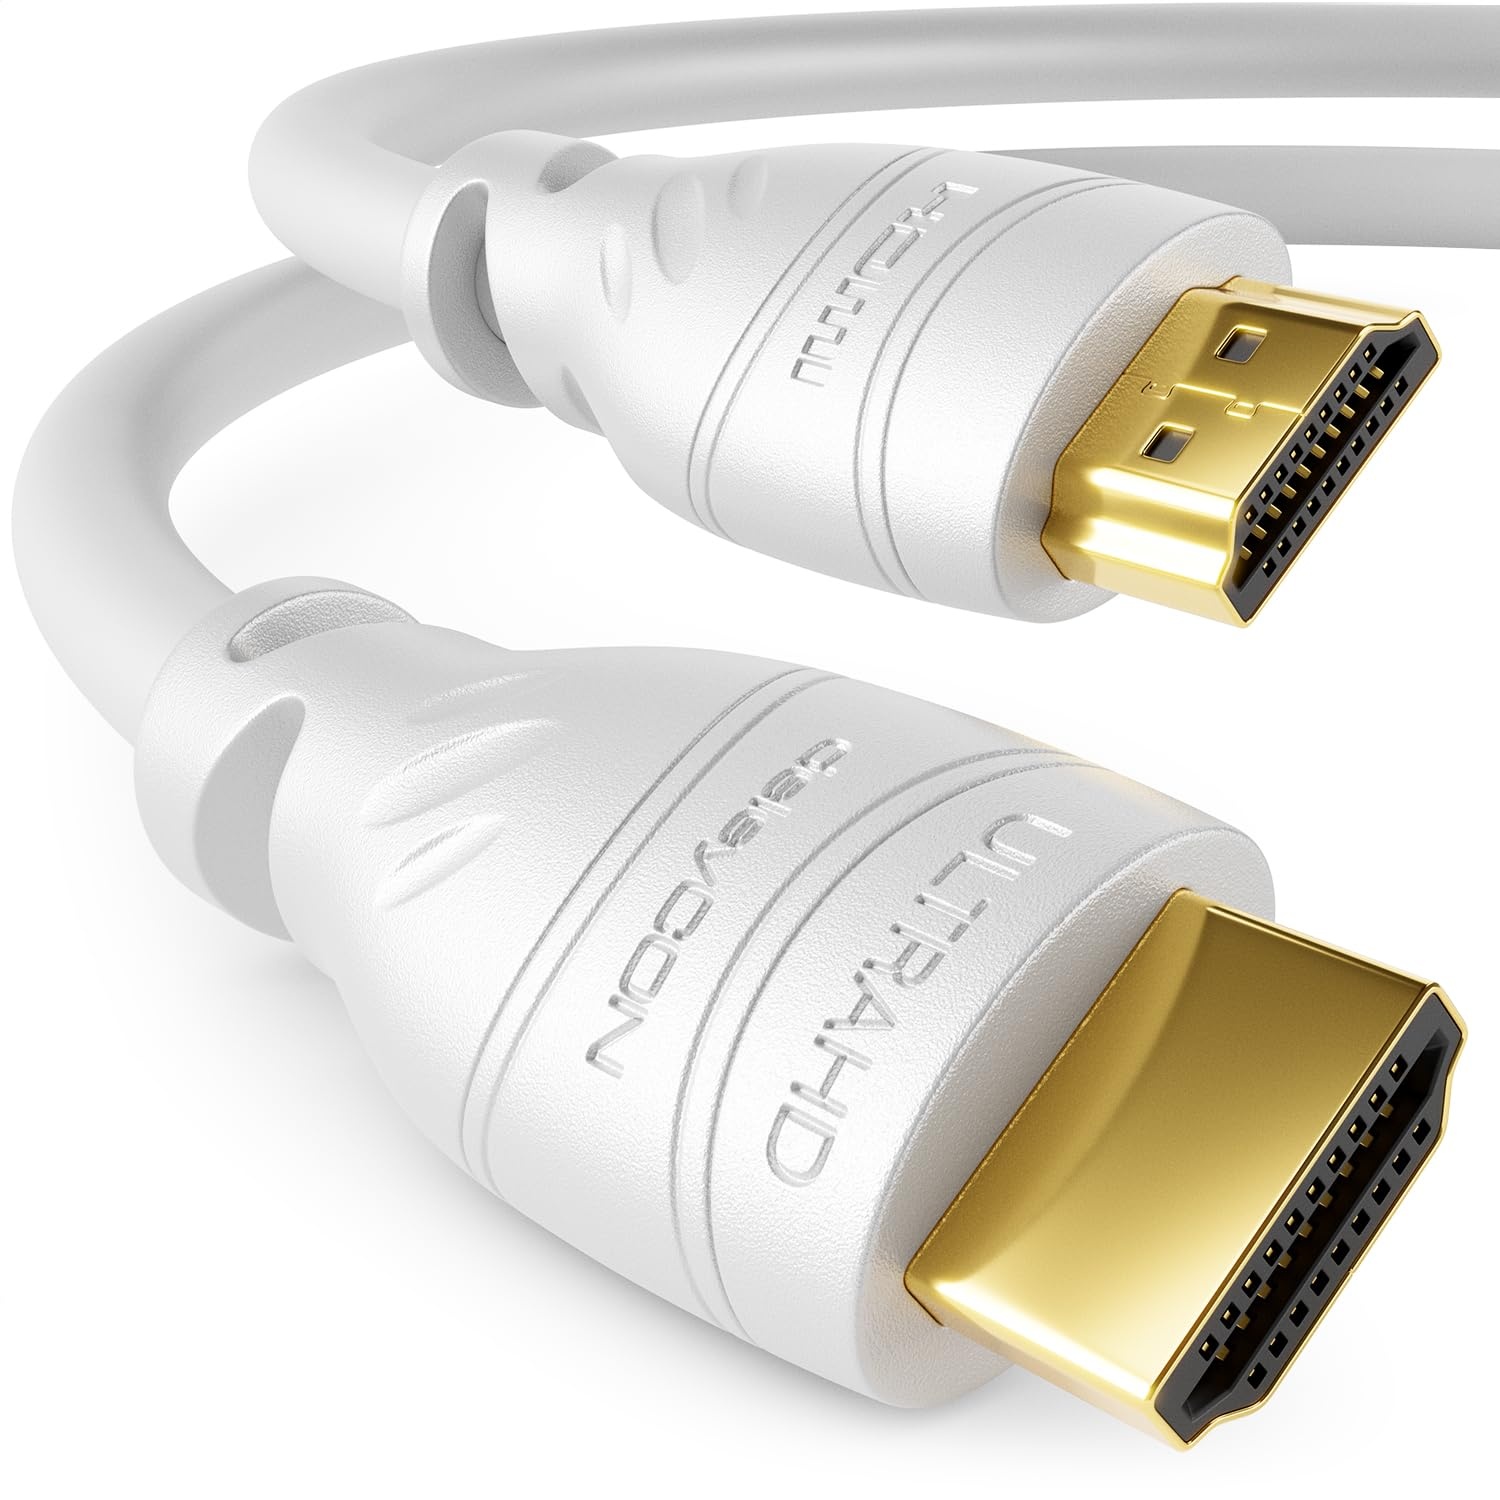 deleyCON 5m HDMI Kabel 2.0a/b - High Speed mit Ethernet - UHD 2160p 4K@60Hz 4:4:4 HDR HDCP 2.2 ARC CEC Ethernet 18Gbps 3D Full HD 1080p Dolby - Weiß